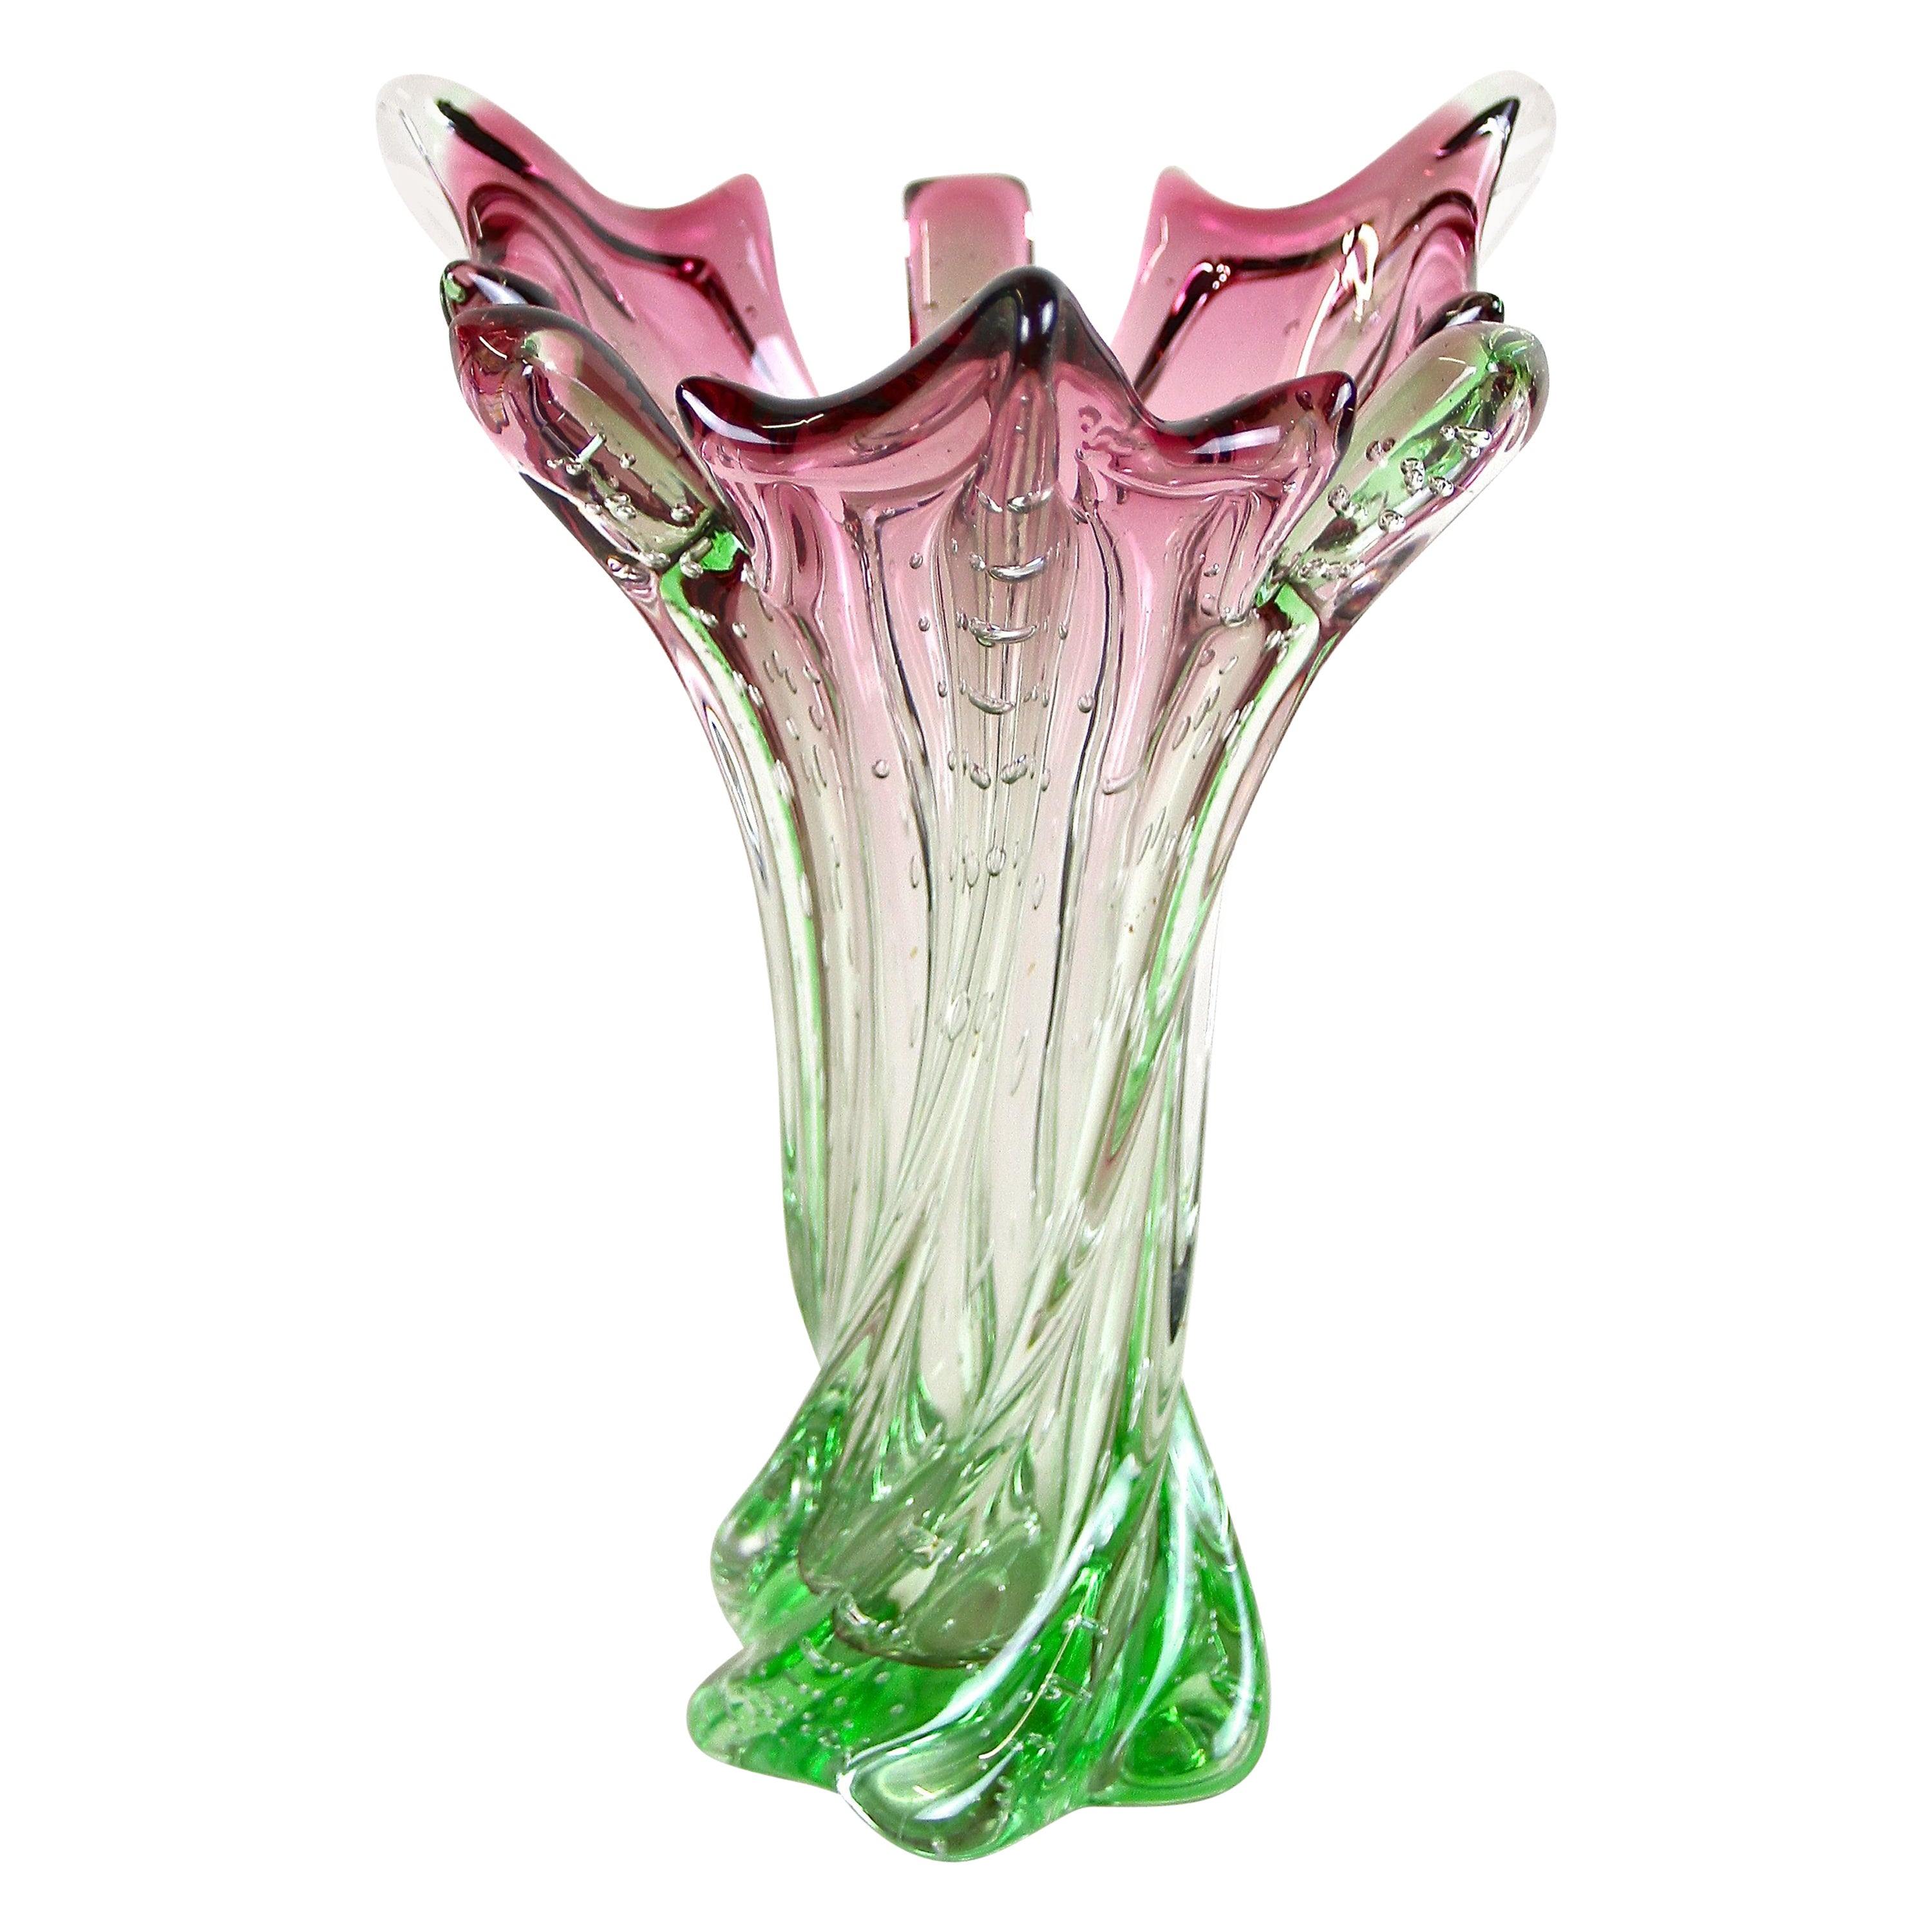 Mid Century Sommerso Murano Glass Vase Pink/ Green, Italy, circa 1960/70